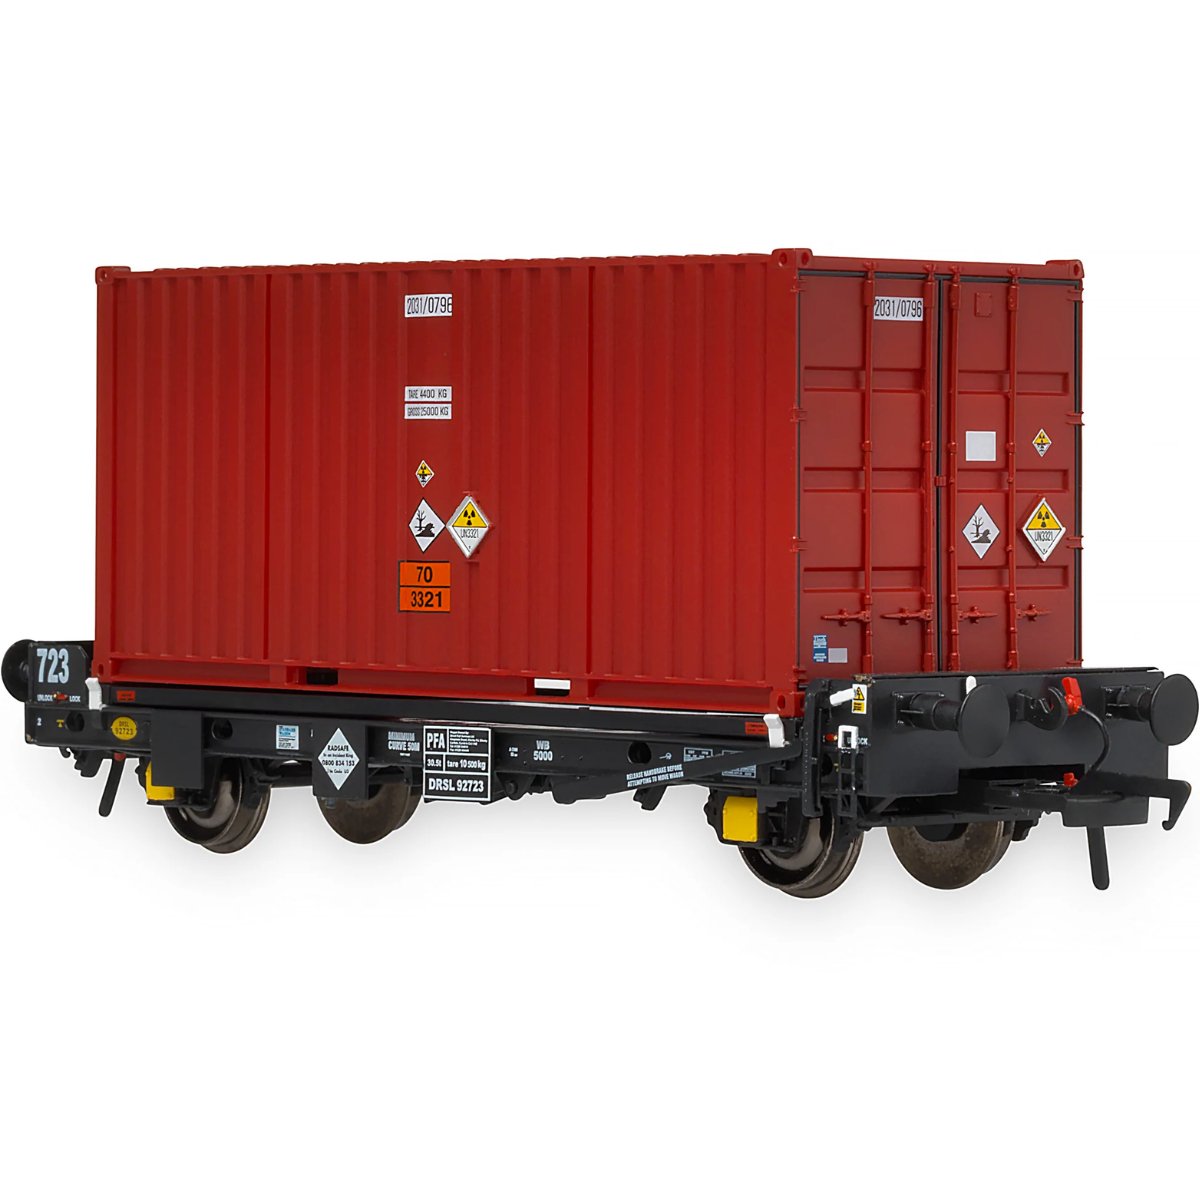 Accurascale PFA - DRS LLNW - 2031 Container Pack 5 - Phillips Hobbies